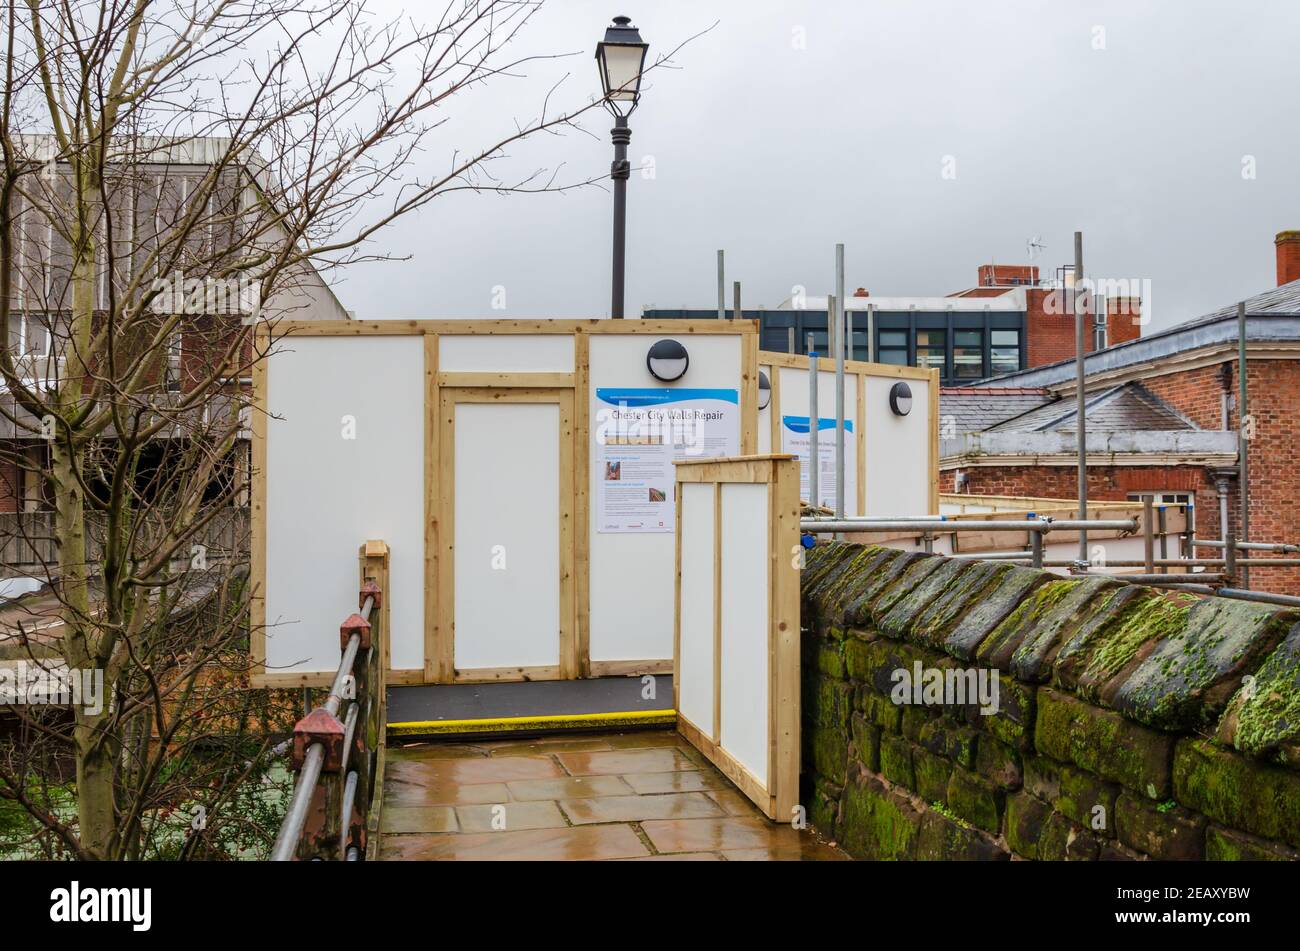 Chester; UK: Jan 29, 2021: Temporary hoardings have been erected on parts of the historic Chester City Walls whilst refurbishment work is carried out. Stock Photo